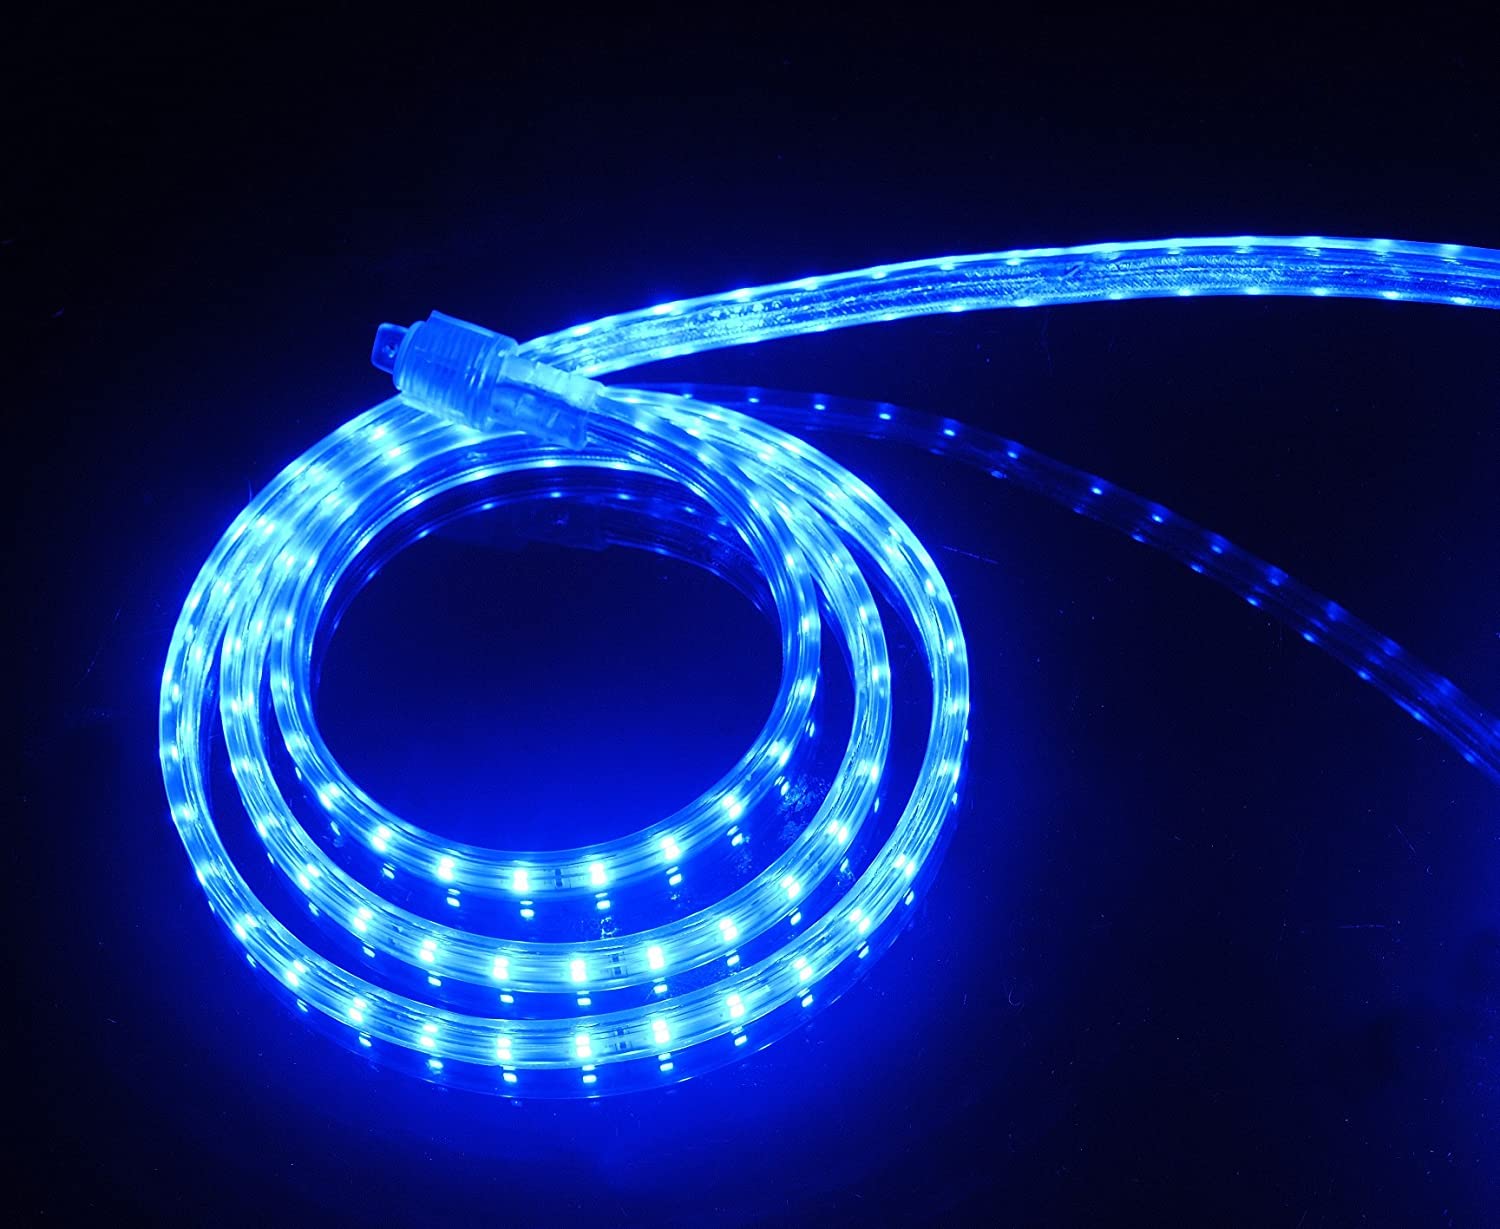 CBconcept UL Listed, 40 Feet, 4300 Lumen, Blue, Dimmable, 110-120V AC Flexible Flat LED Strip Rope Light, 720 Units 3528 SMD LEDs, Indoor/Outdoor Use, Accessories Included, [Ready to use]